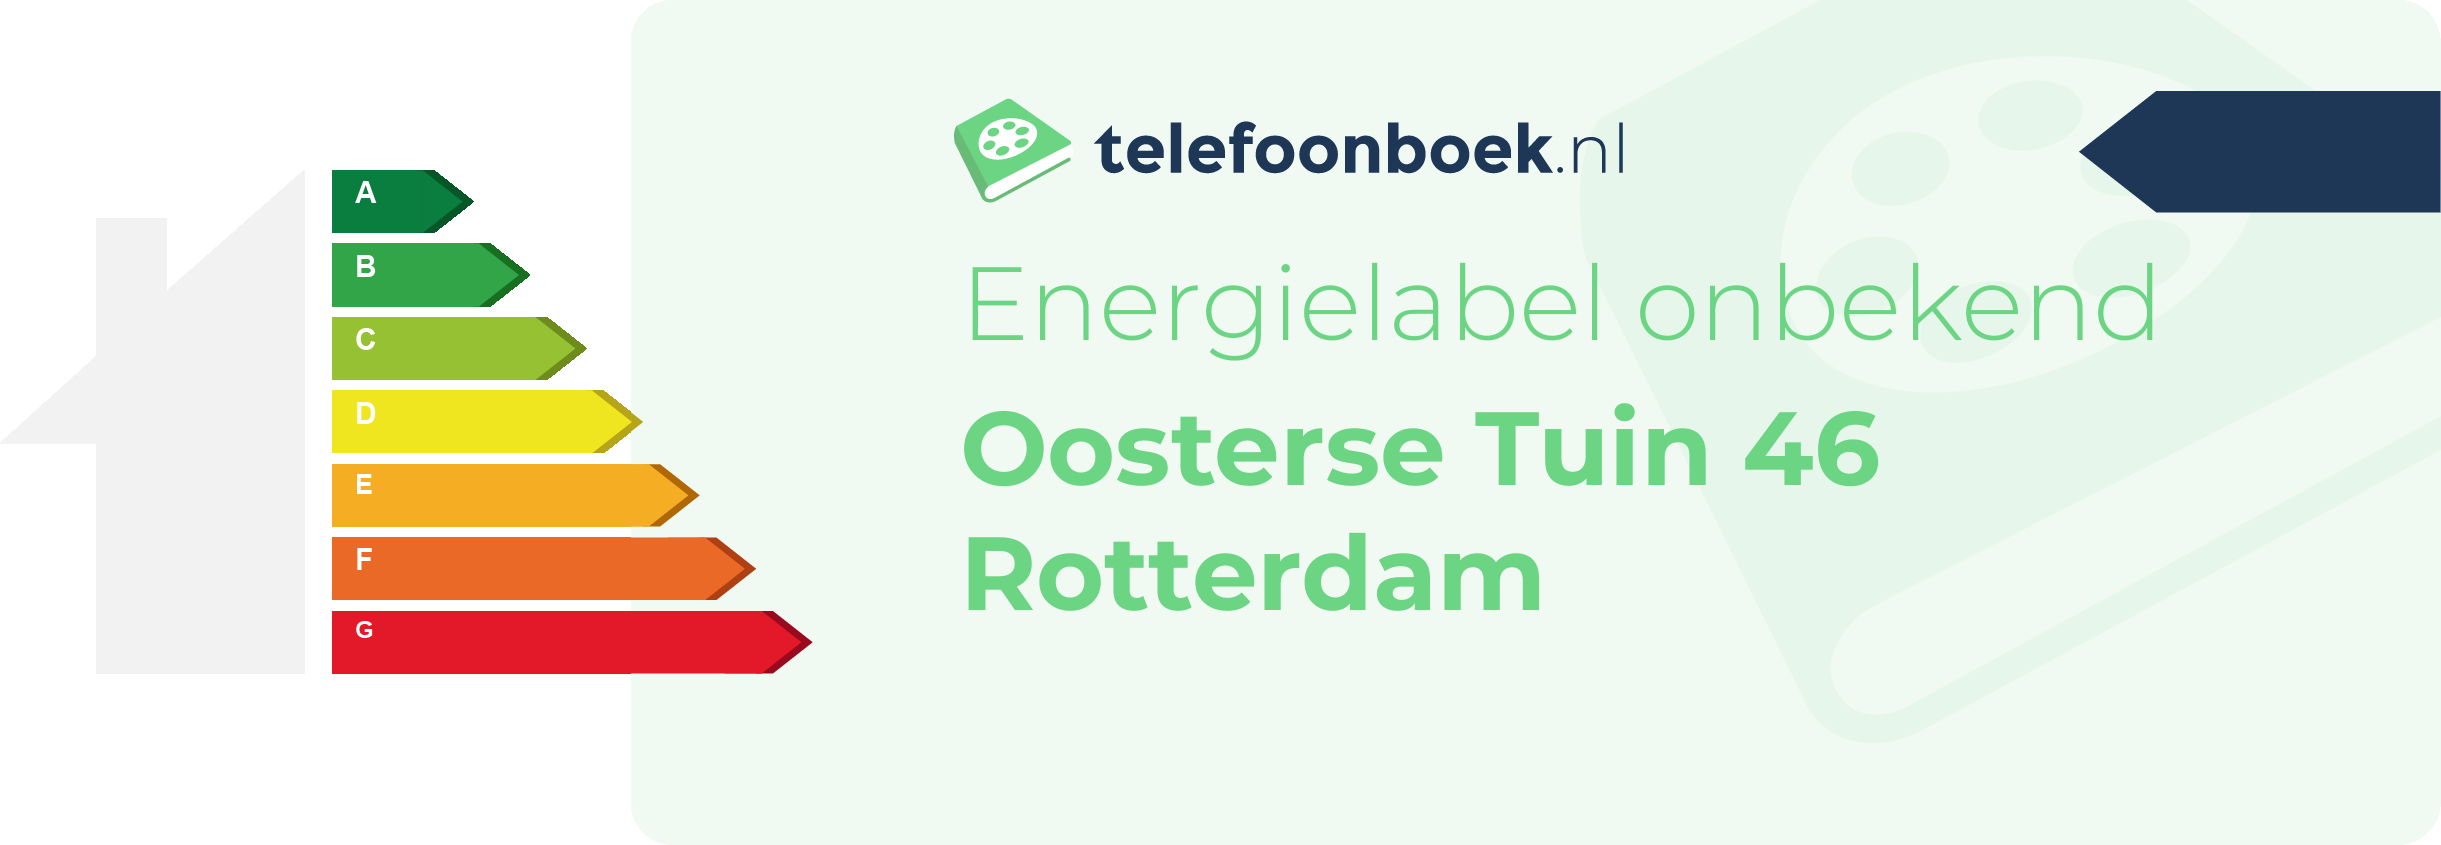 Energielabel Oosterse Tuin 46 Rotterdam